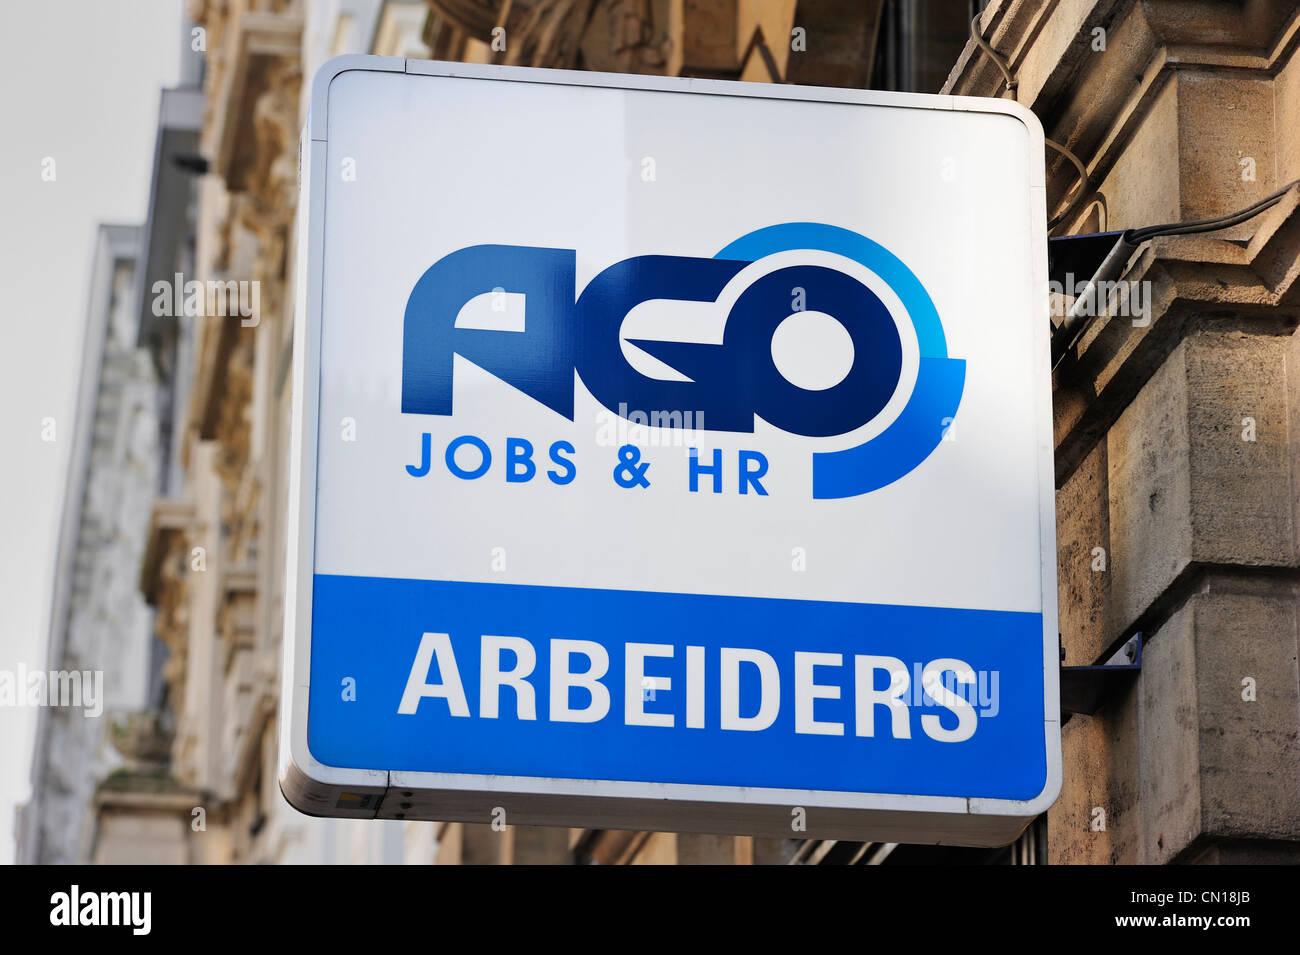 Signboard with logo for temporary employment agency AGO Interim contracting workers, Flanders, Belgium Stock Photo